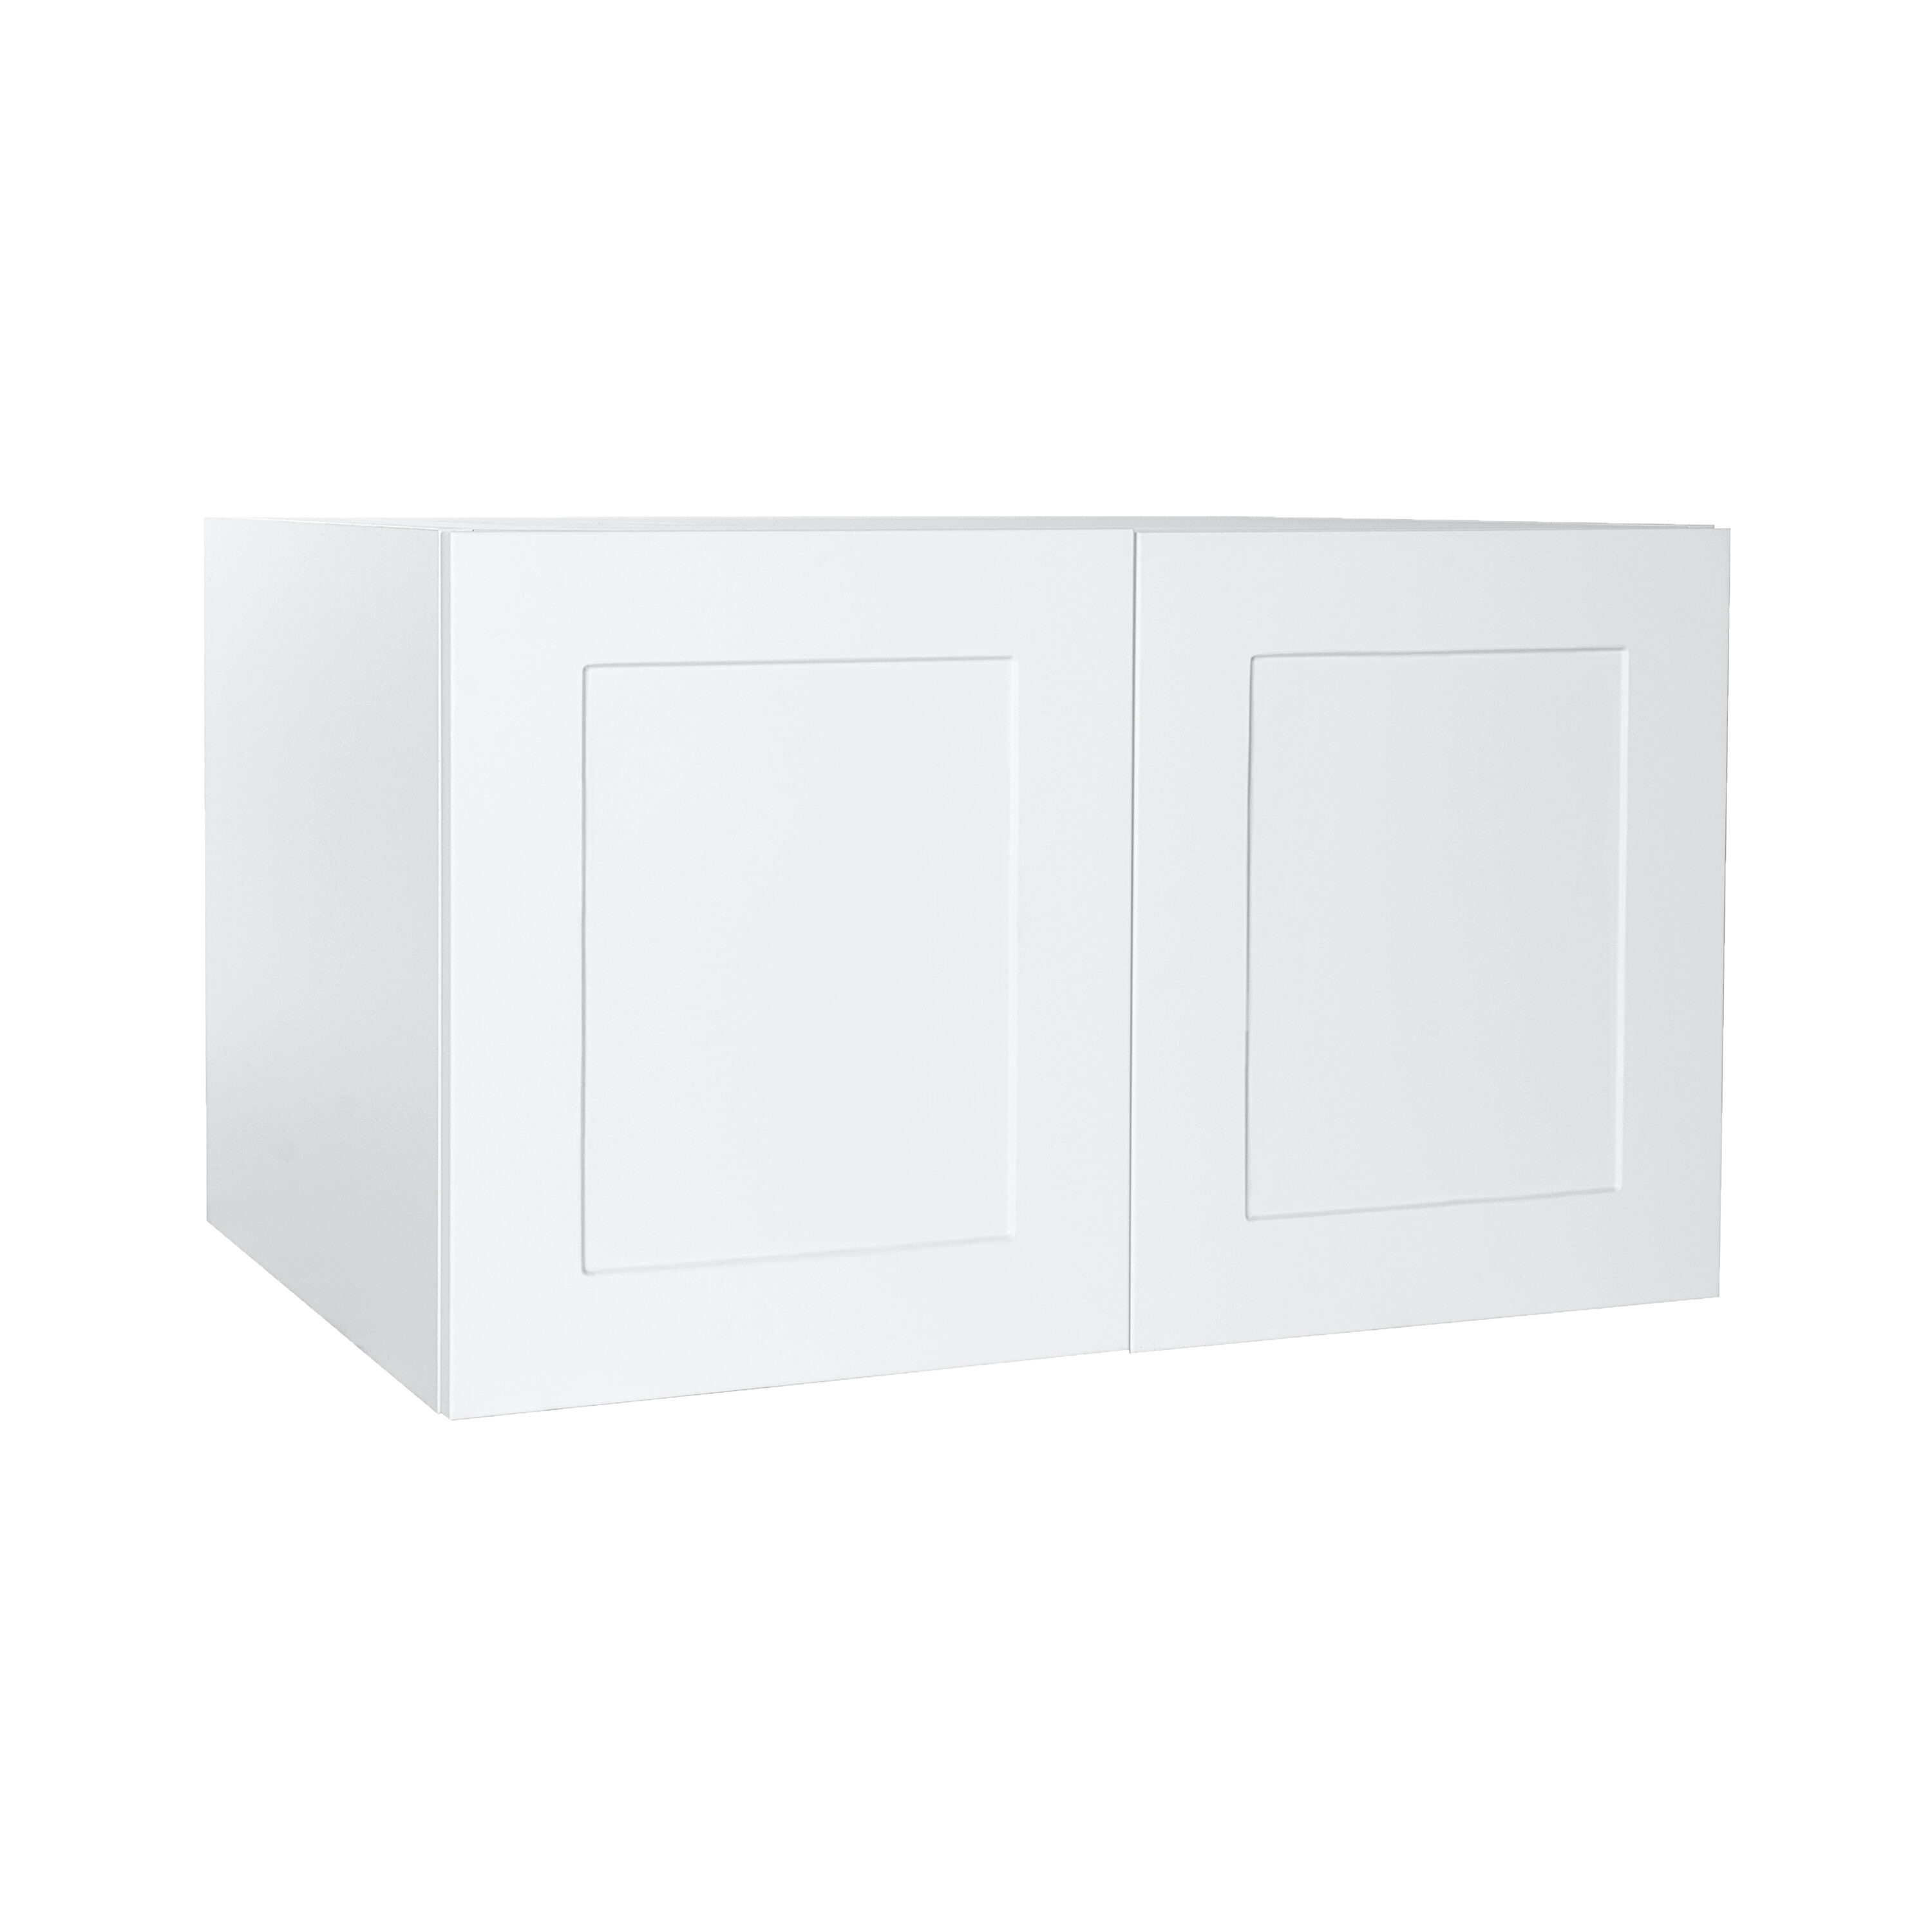 Home Expressions Long Vanity Closet Storage Bin, Color: White